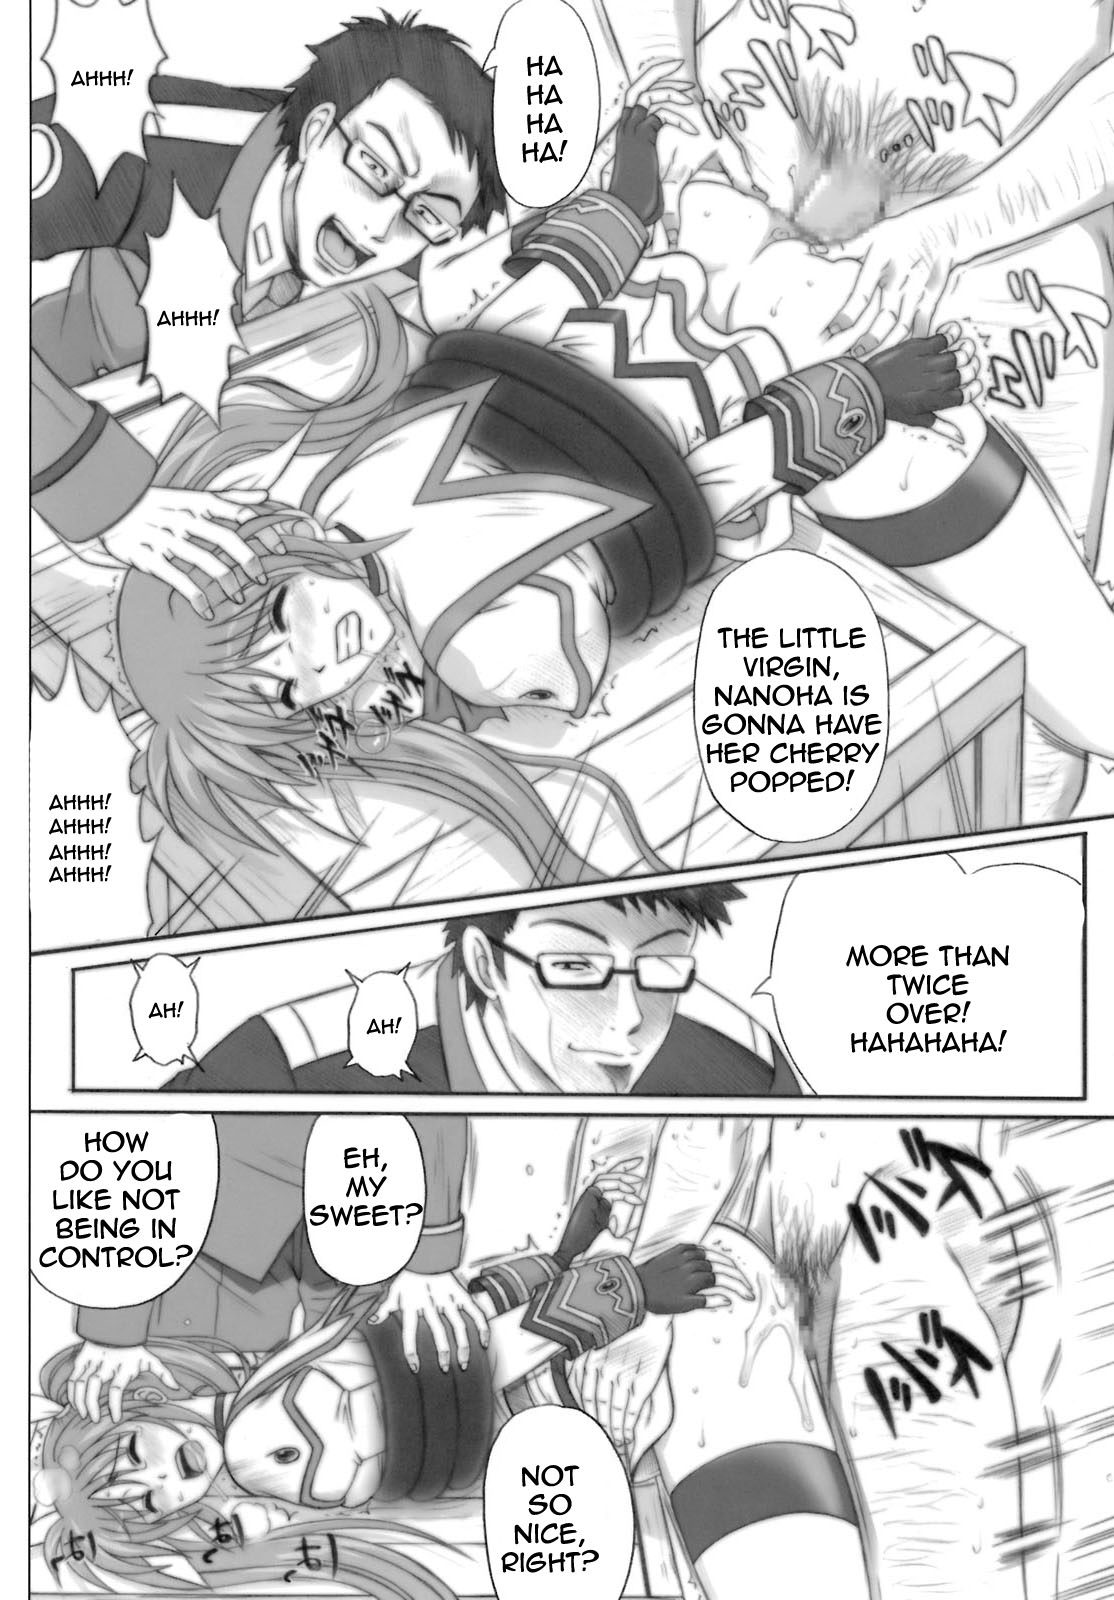 840 Color Classic Situation Note Extention (Mahou Shoujo Lyrical Nanoha) [English] [Rewrite] page 32 full